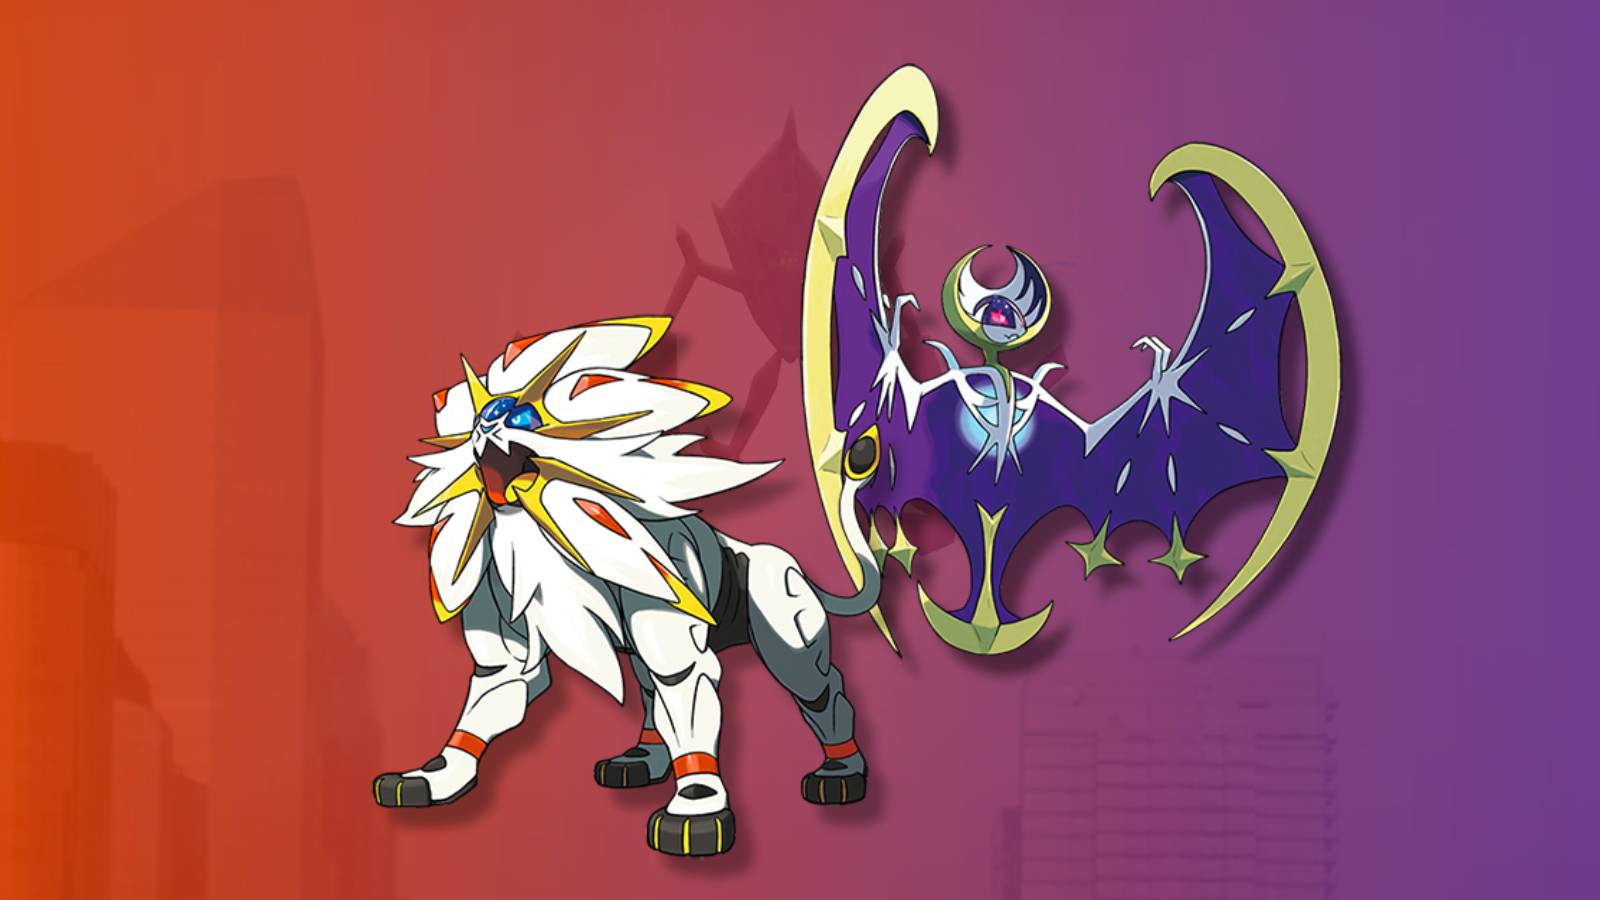 The Pokemon Solgaleo and Lunala appear against a gradient background